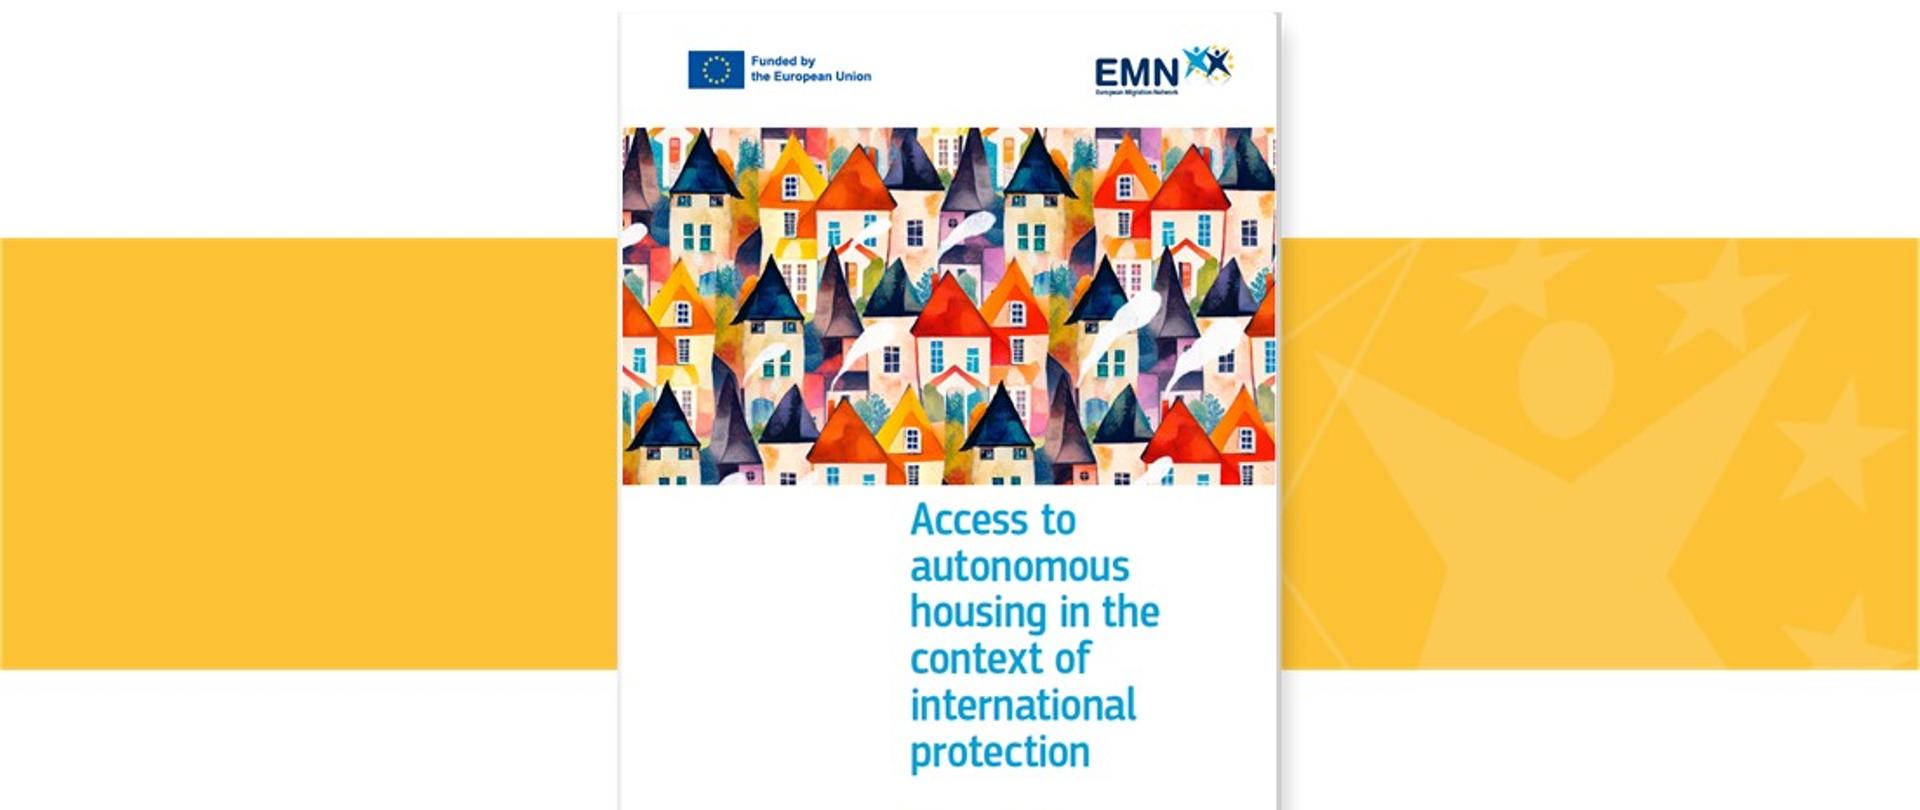 EMN Inform Access to autonomous housing in the context of international protection